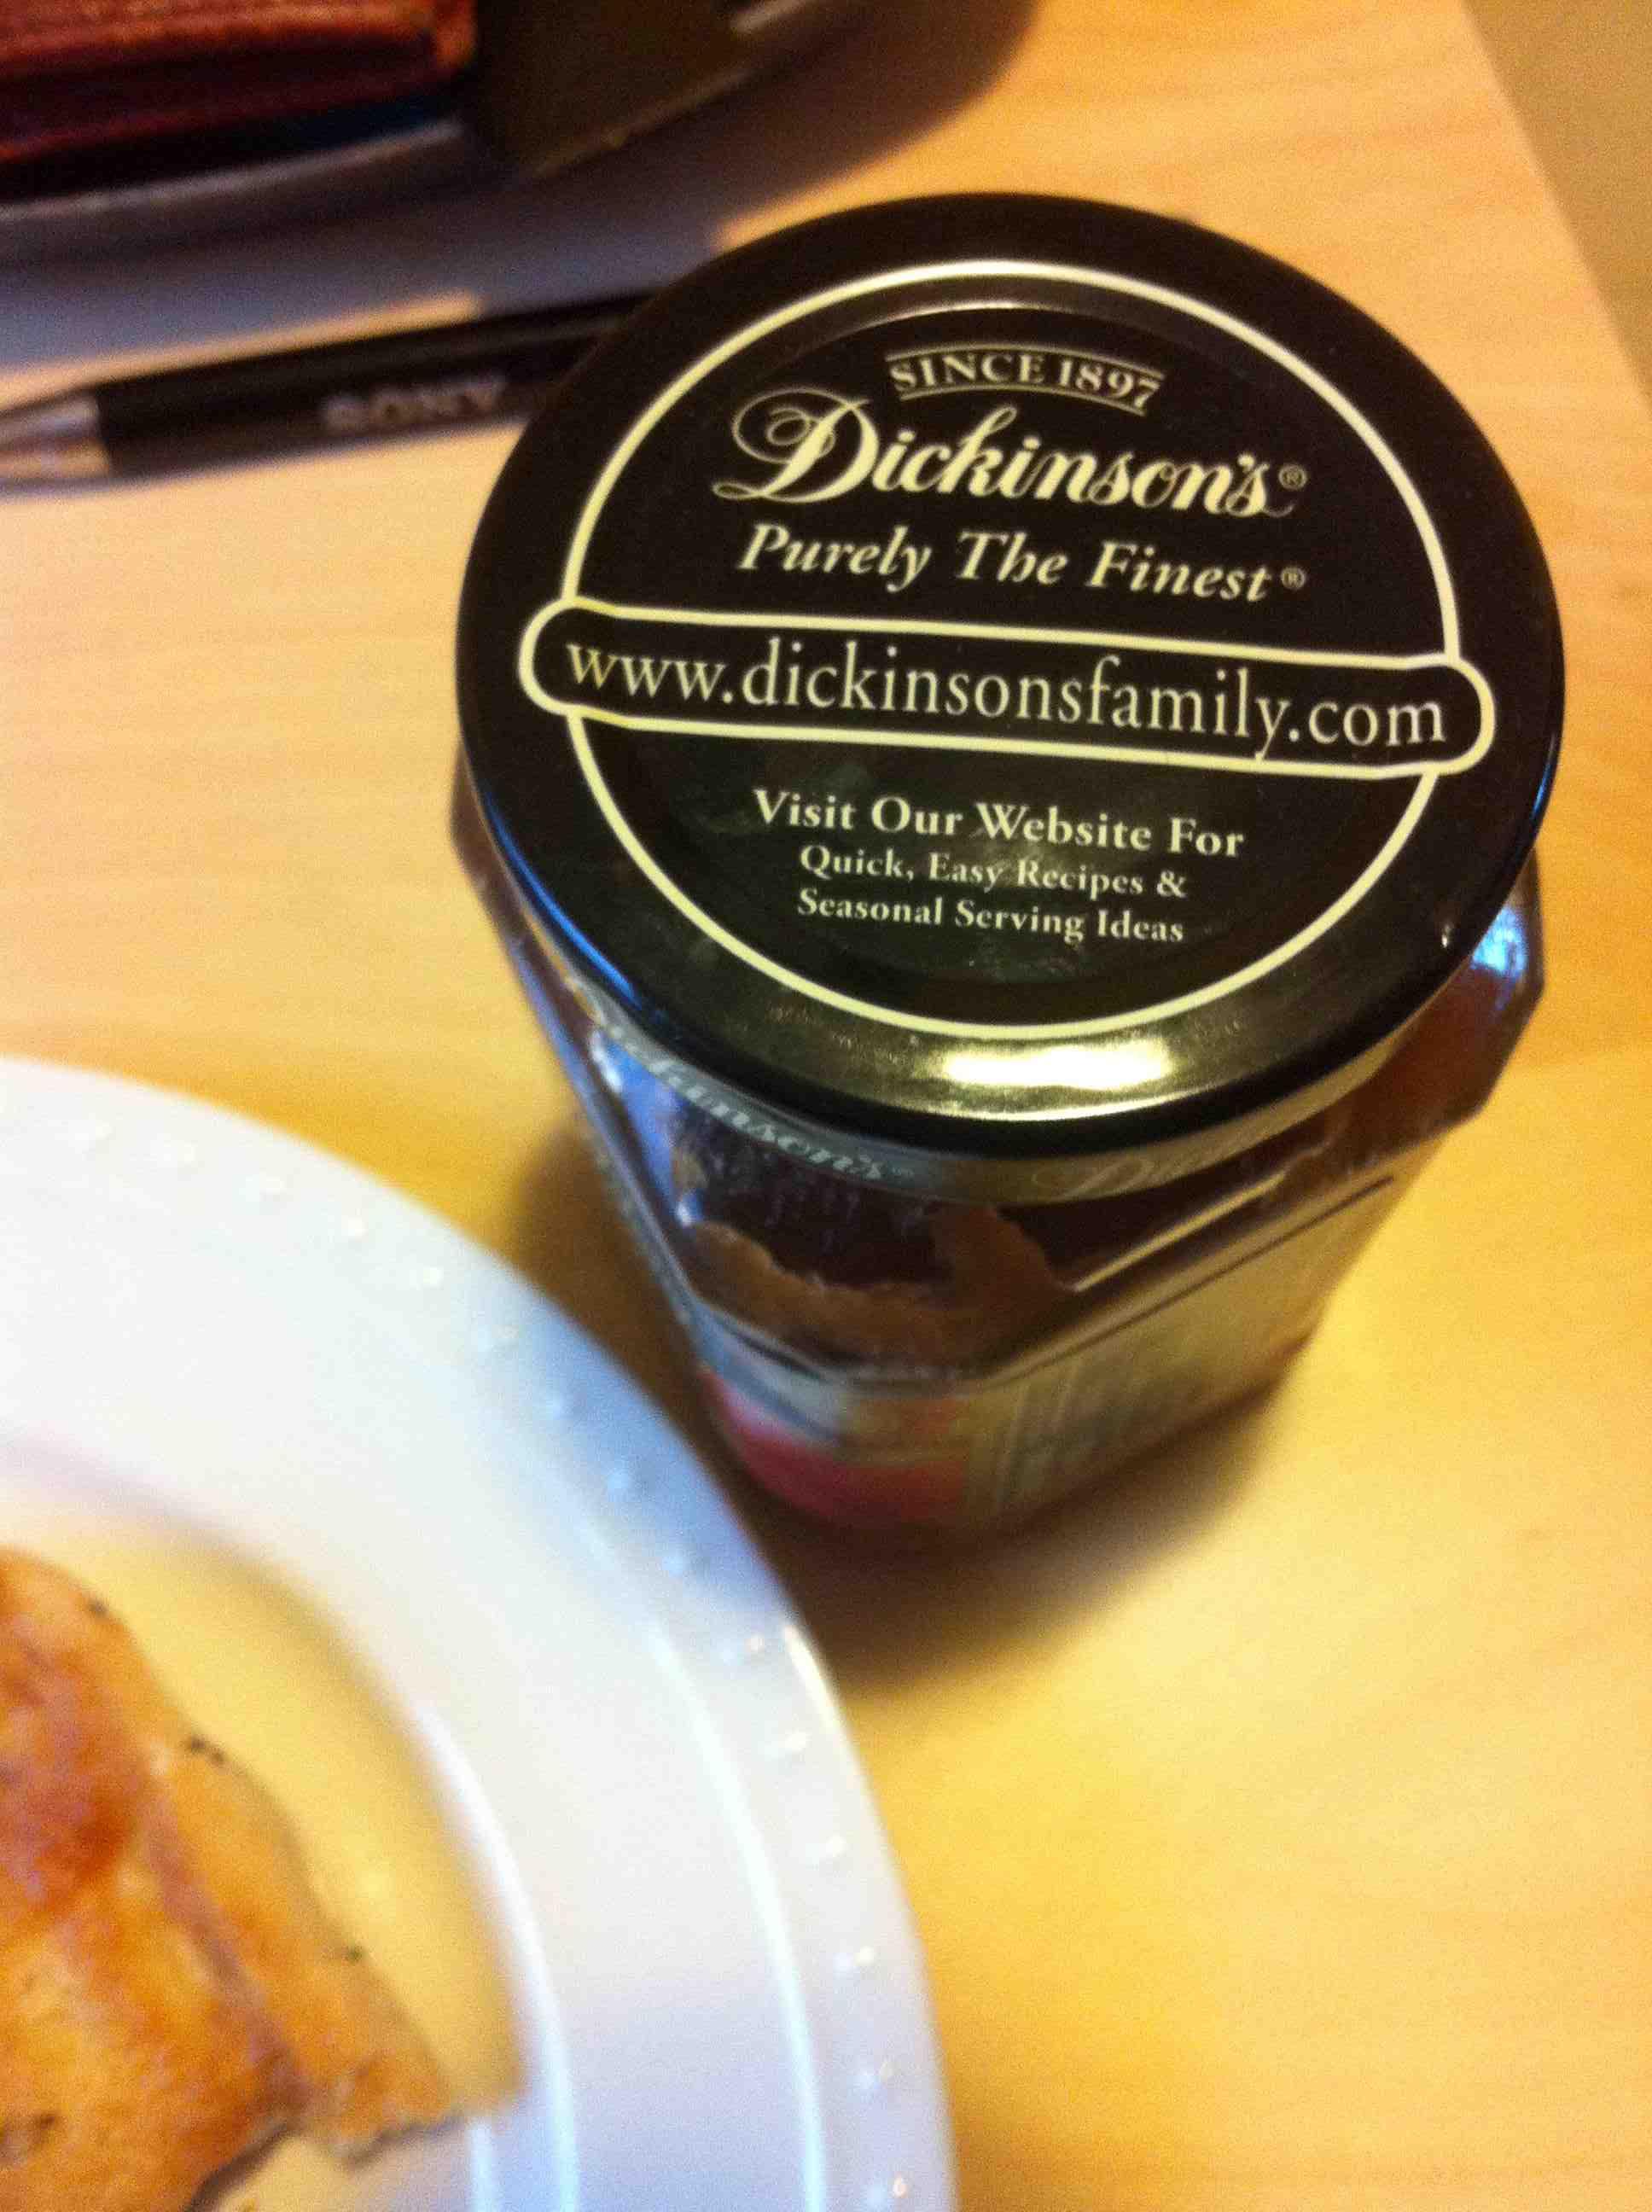 dish - Since 1897 Dickinsons Purely The Finest Visit Our Website For Quick, Easy Recipes & Seasonal Serving Ideas